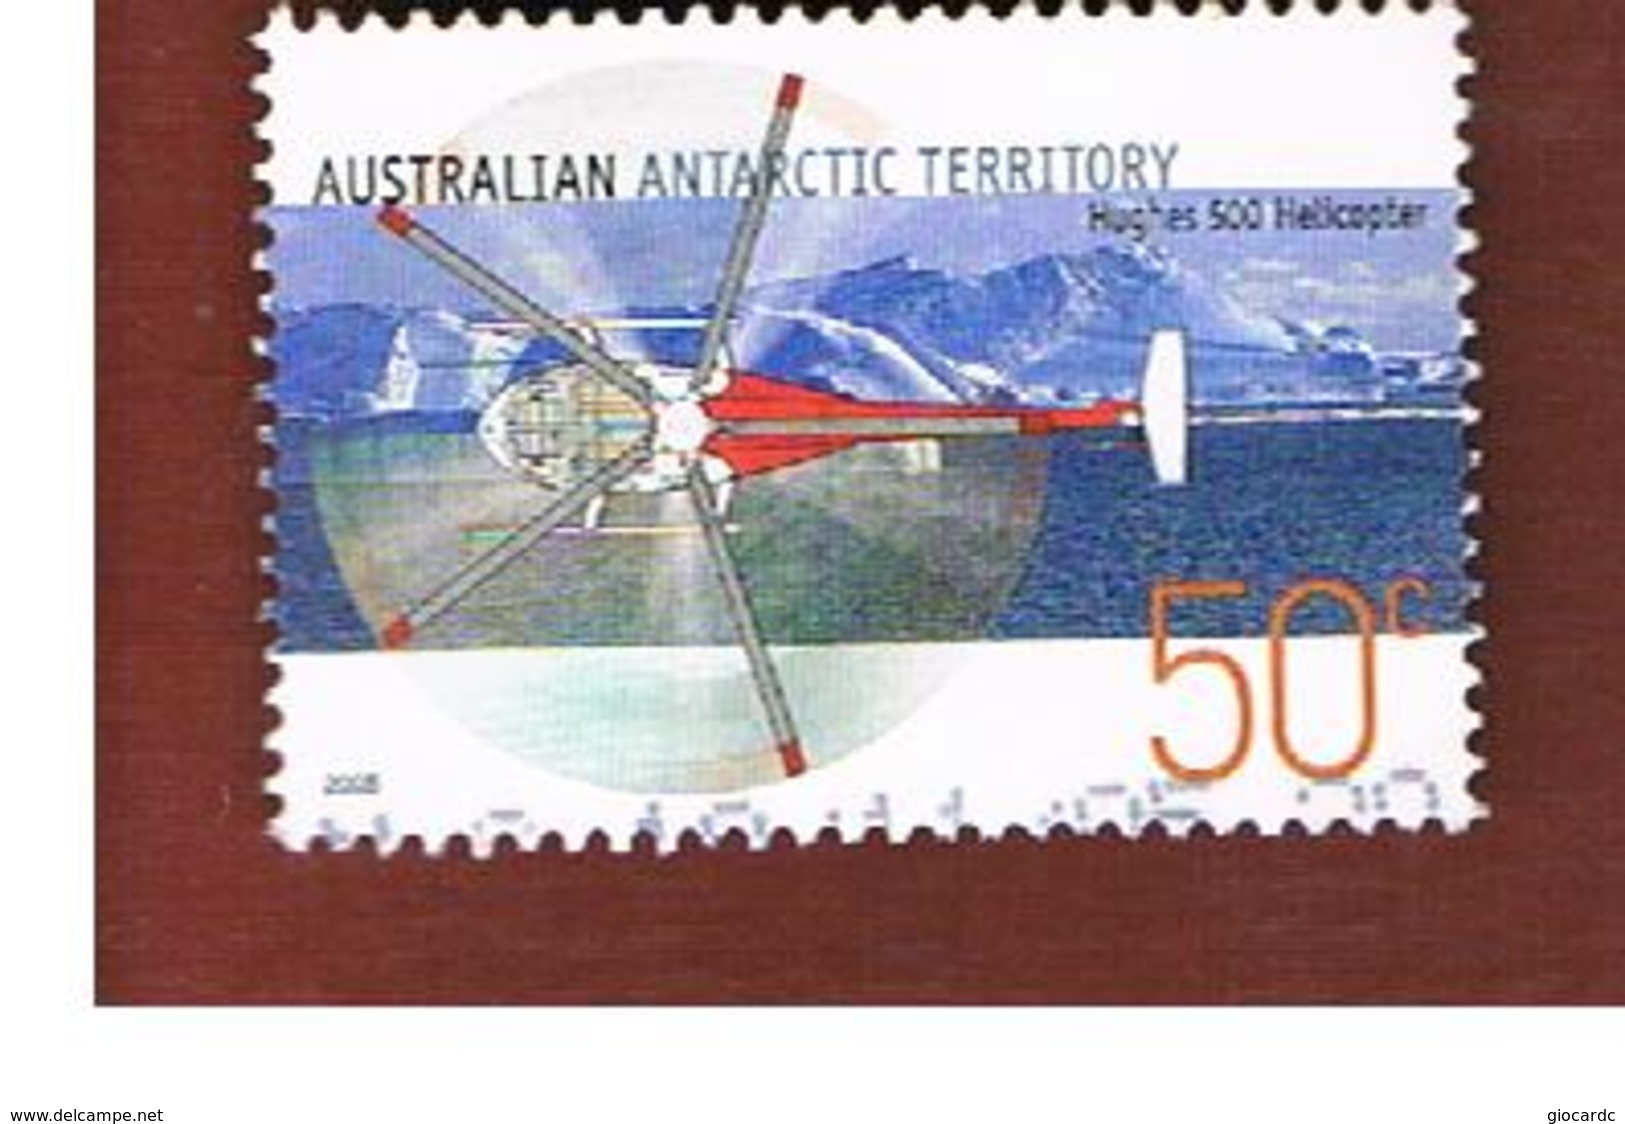 AAT AUSTRALIAN ANTARCTIC TERRITORY - SG 168  - 2005 AIRPLANES: HUGHES 500 HELICOPTER      -  USED - Usati